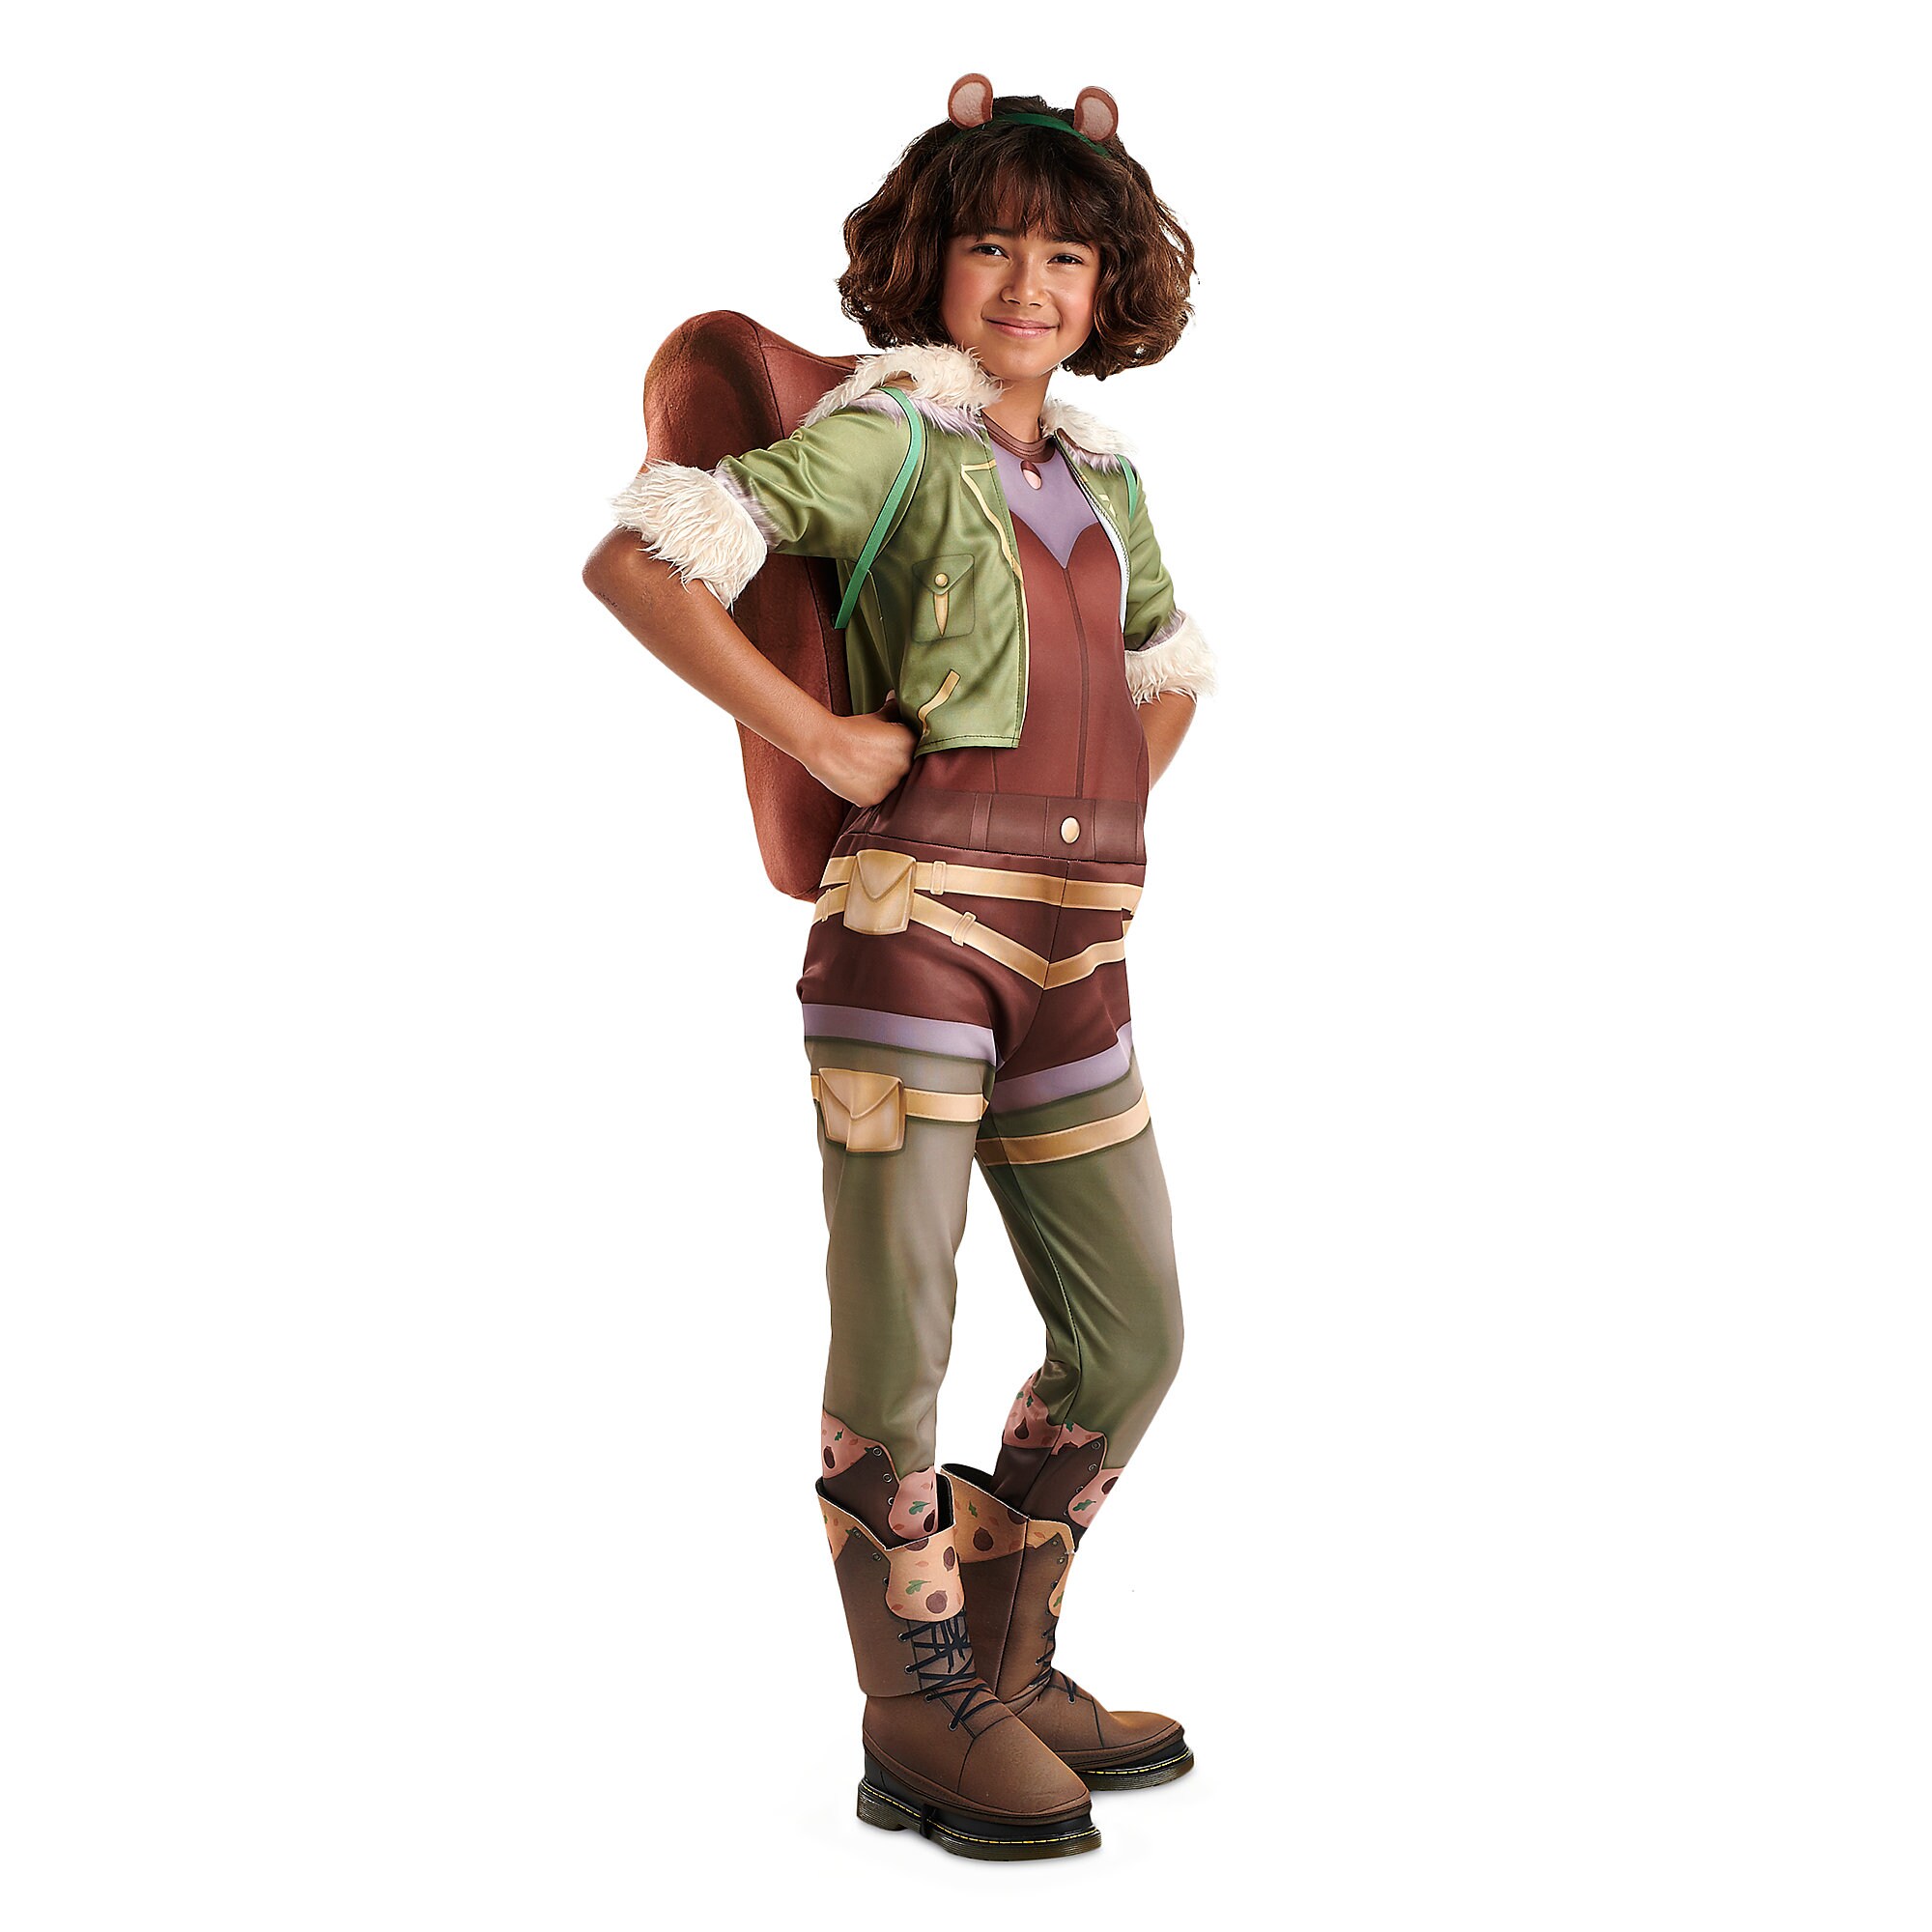 Squirrel Girl Deluxe Costume for Kids by Rubies